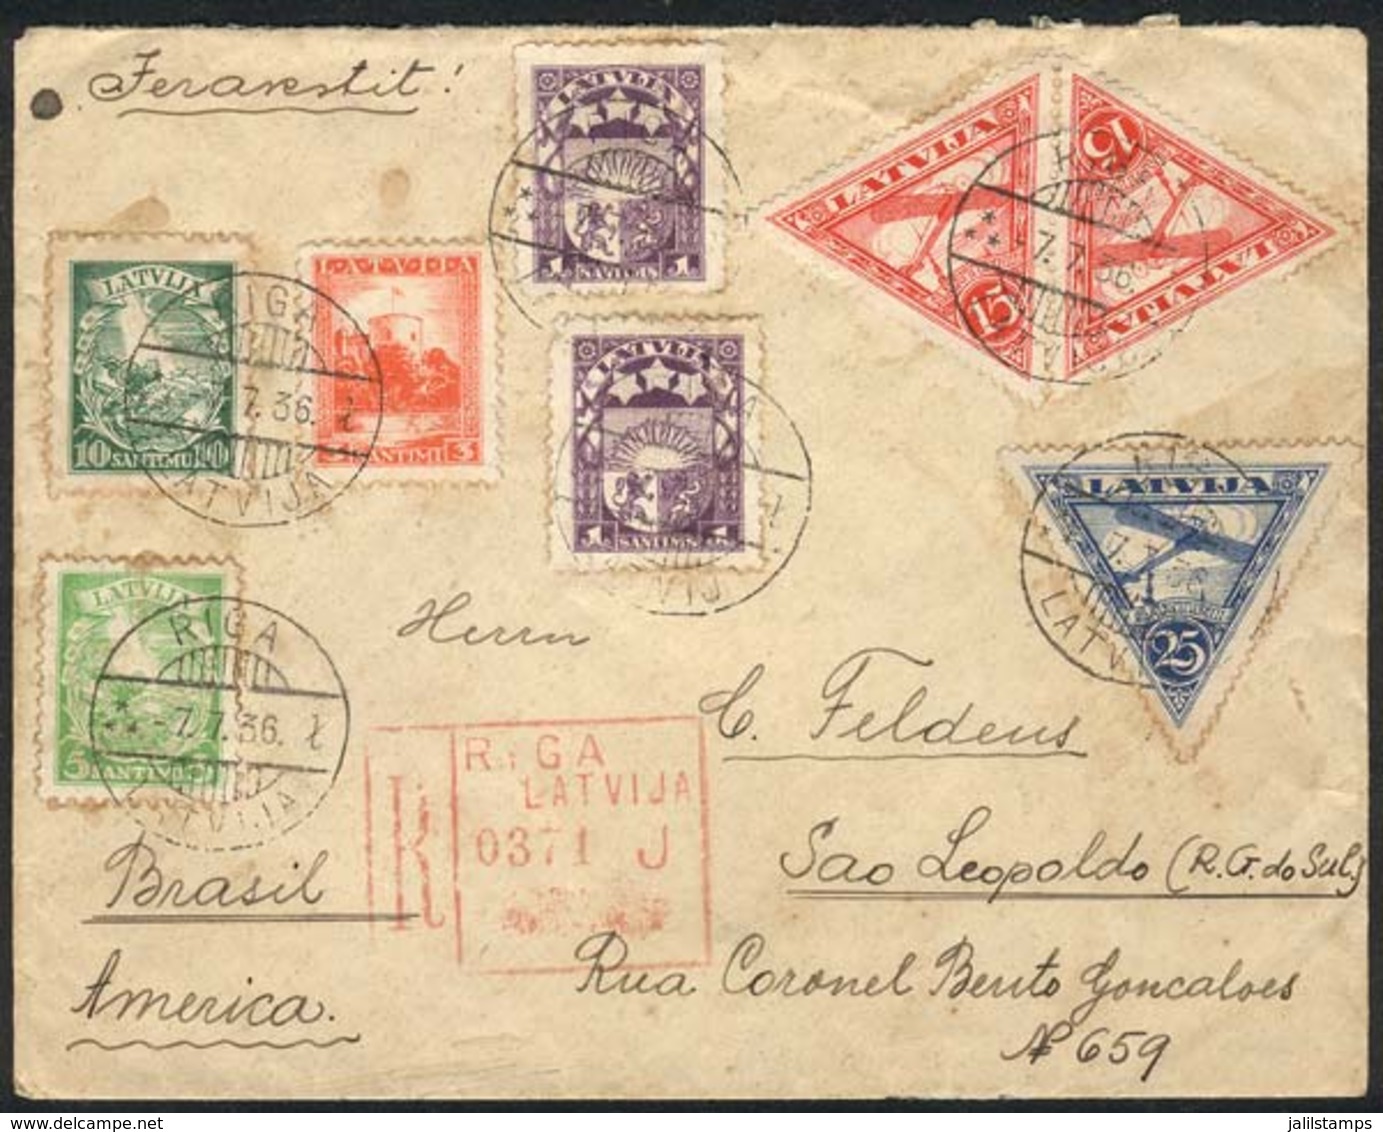 LATVIA: Airmail Cover Sent From Riga To Brazil On 7/JUL/1936 With Very Nice Postage And Beautiful Cinderella On Reverse! - Lettland